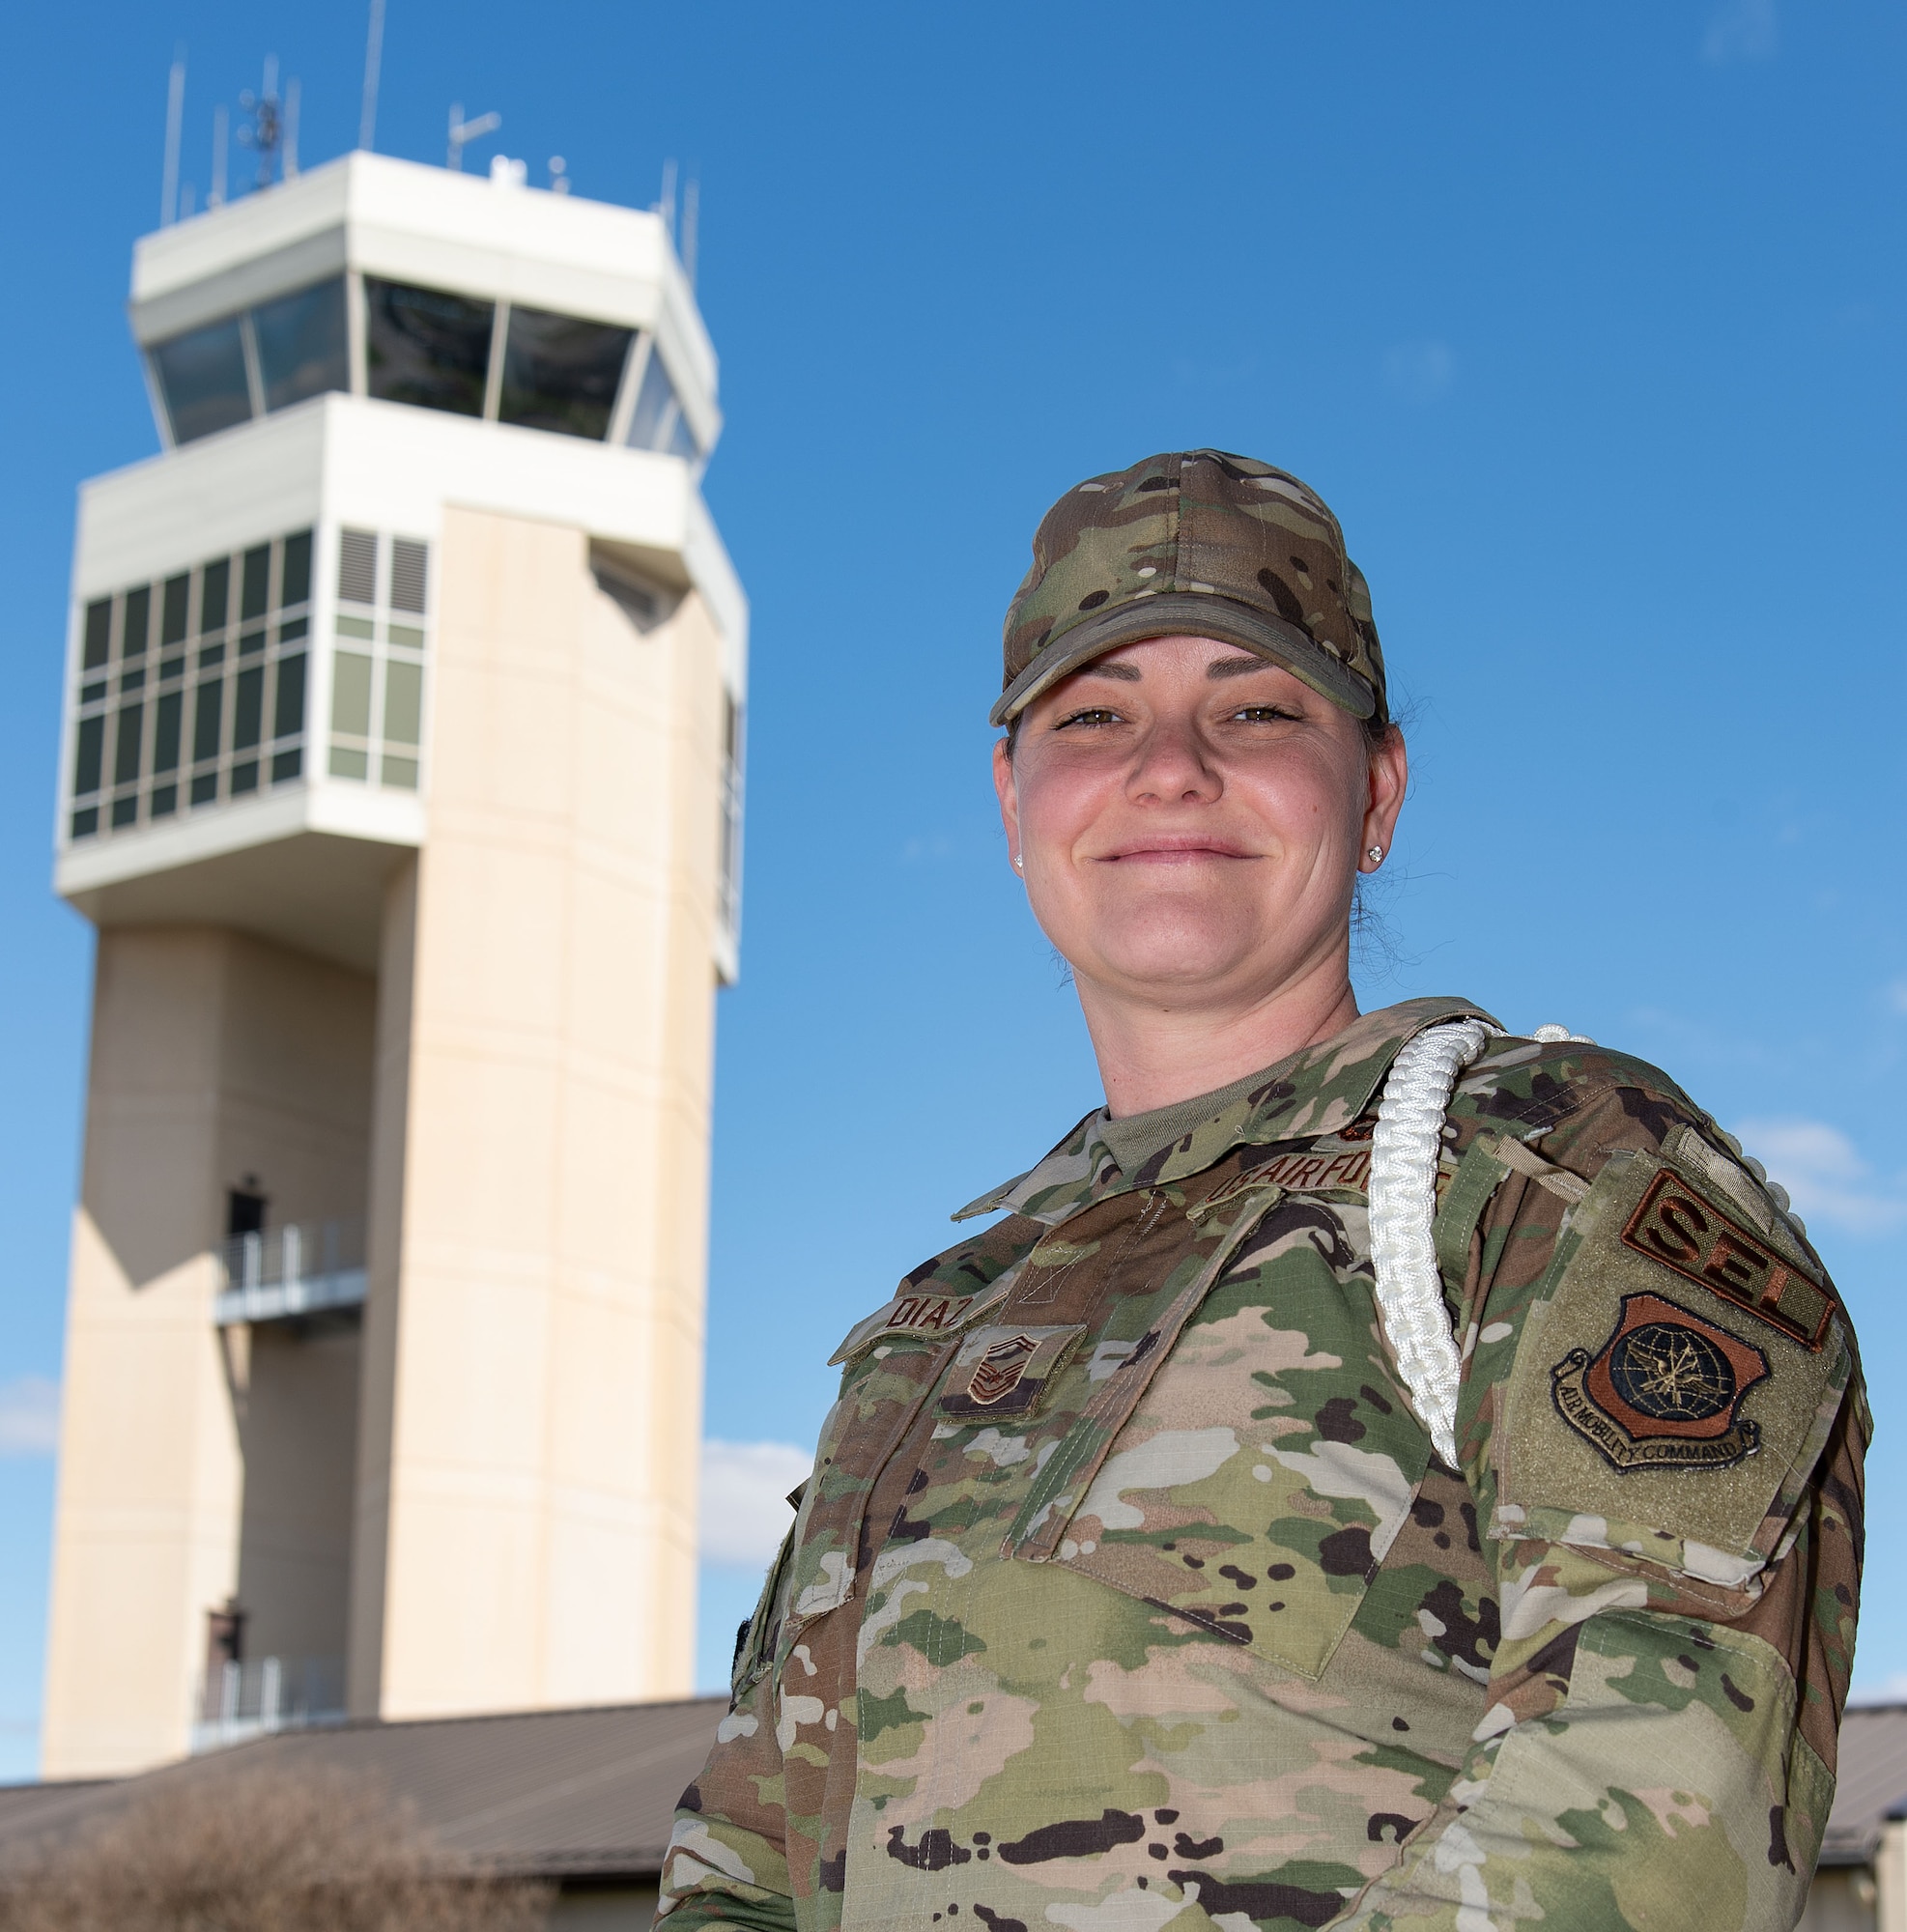 U.S. Air Force Senior Master Sgt. Abigail Diaz, 436th Operations Support Squadron senior enlisted leader, stands near the air traffic control tower at Dover Air Force Base, Delaware, March 19, 2024. Diaz was recognized as the 2023 Air Mobility Command ATC Senior Noncommissioned Officer of the Year. (U.S. Air Force photo by Roland Balik)